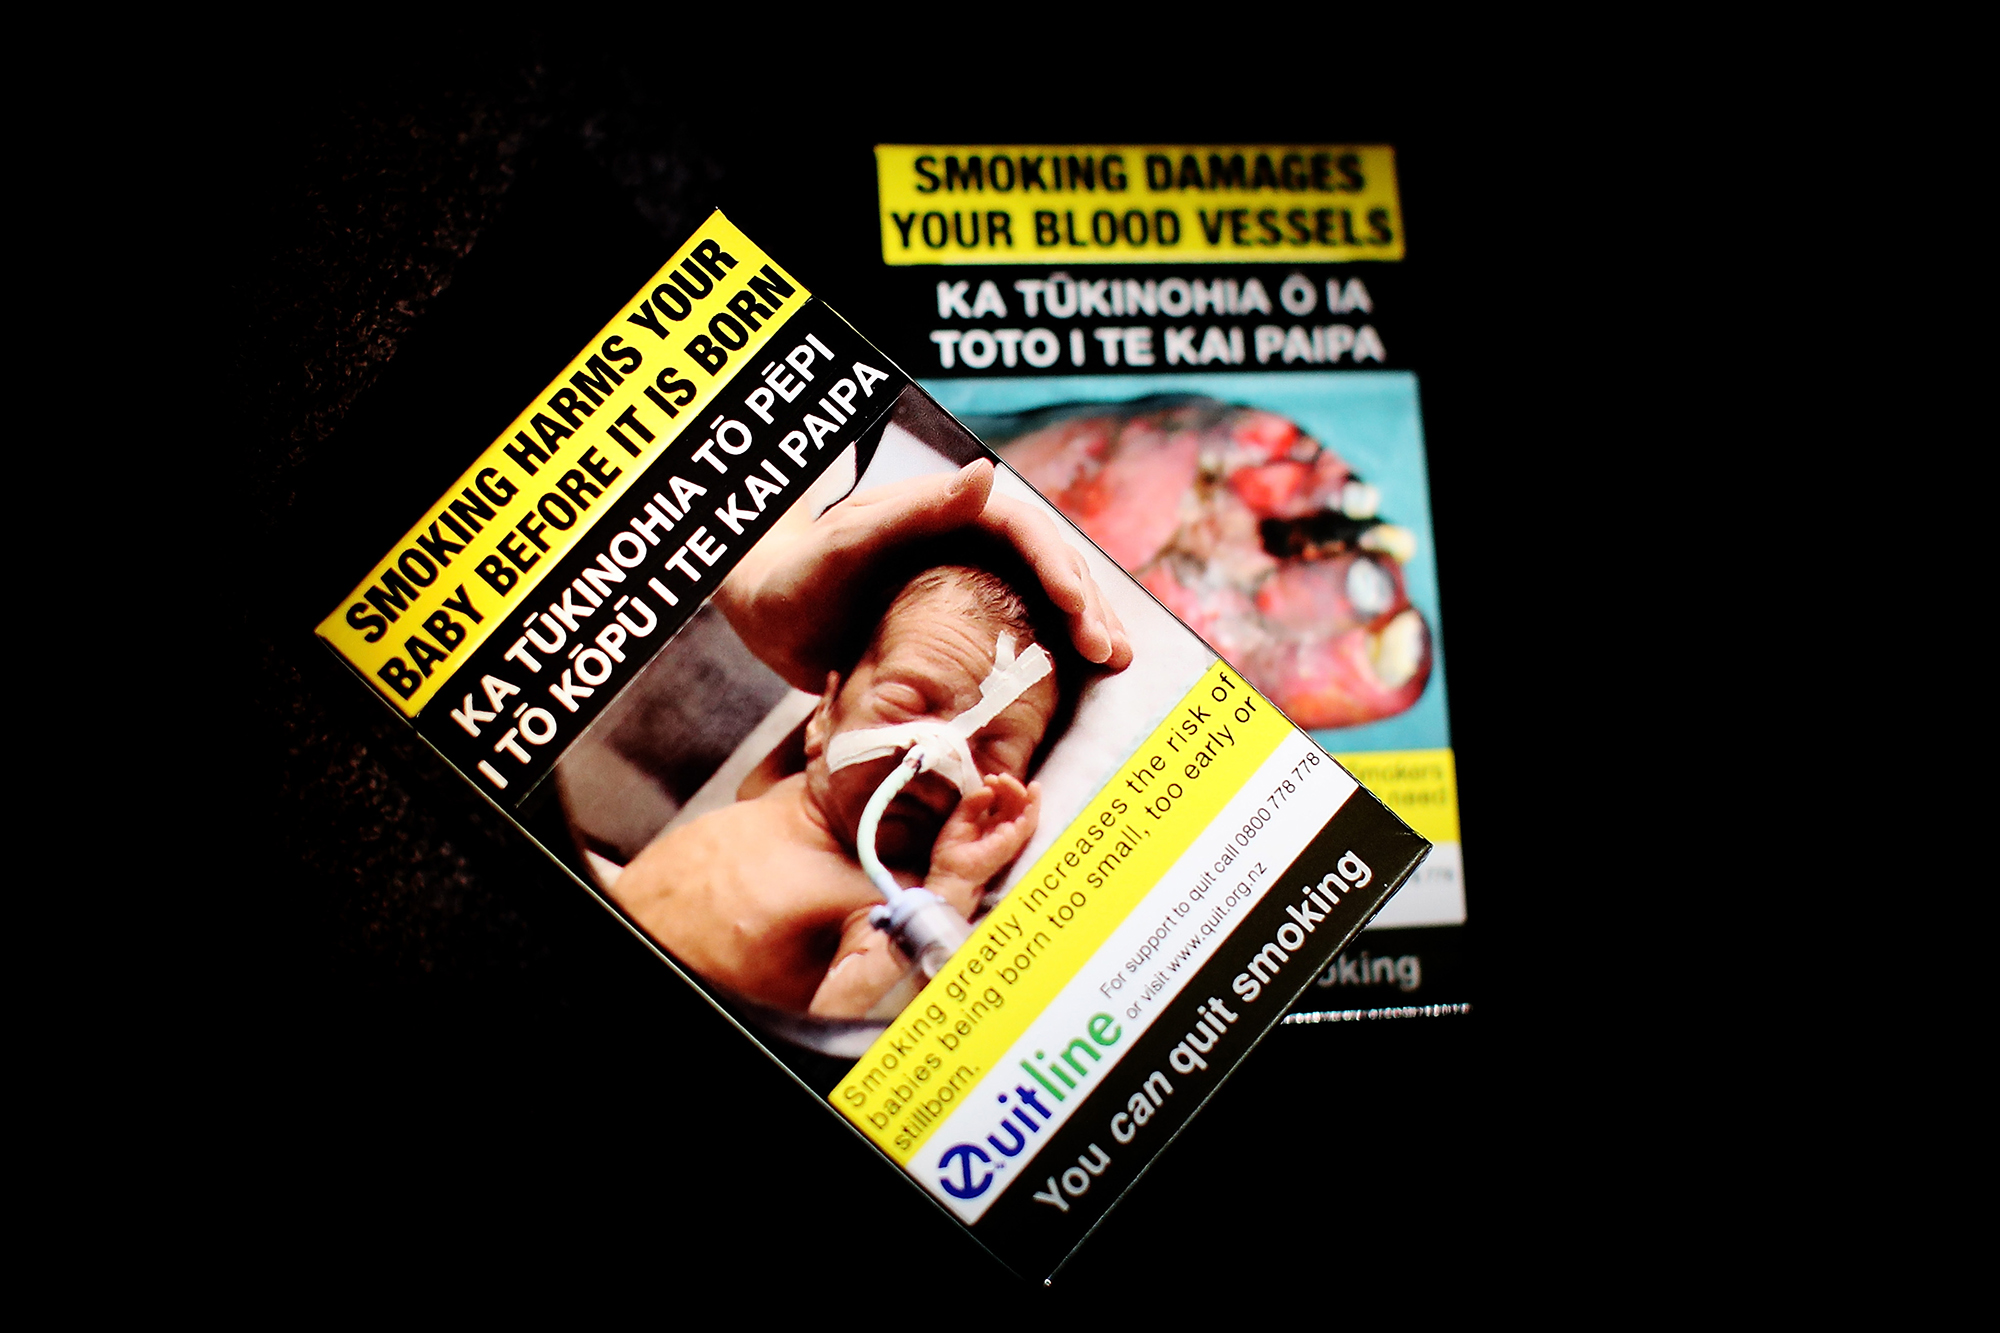 According to New Zealand officials, more than 11 percent of all New Zealanders over age 15 currently smoke.